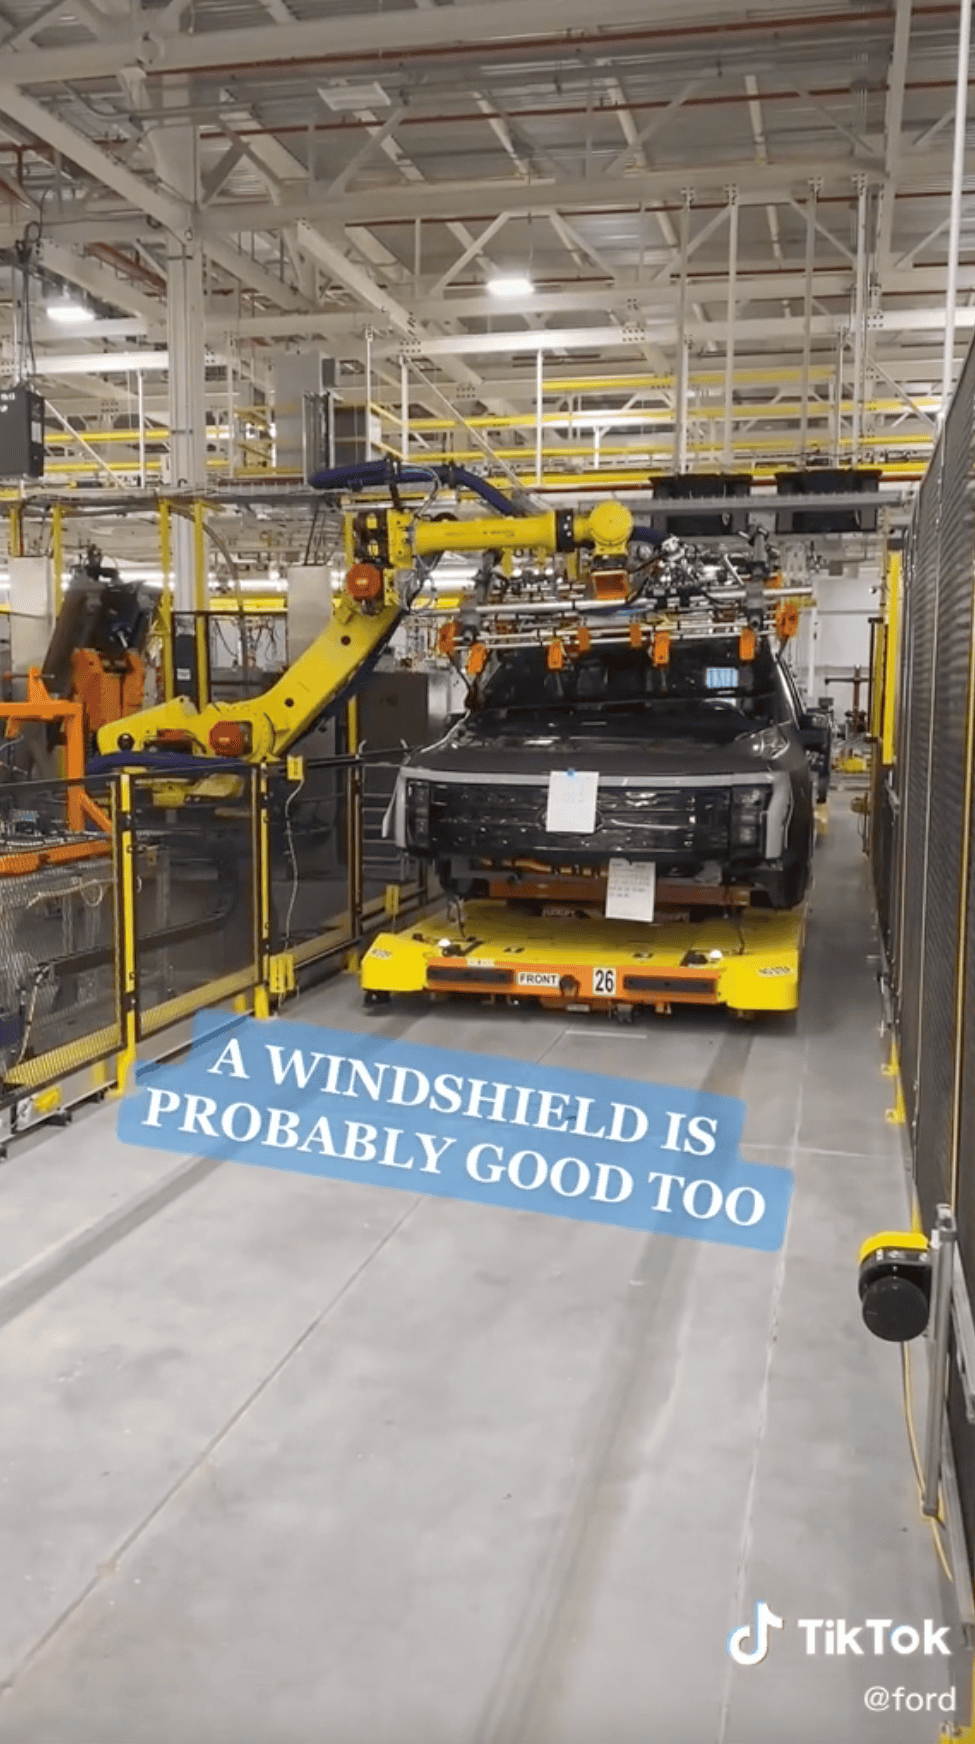 Ford F-150 Lightning F-150 Lightning Production Assembly Plant Video Shared by Ford on Tiktok f150 lightning production assembly line plant 6